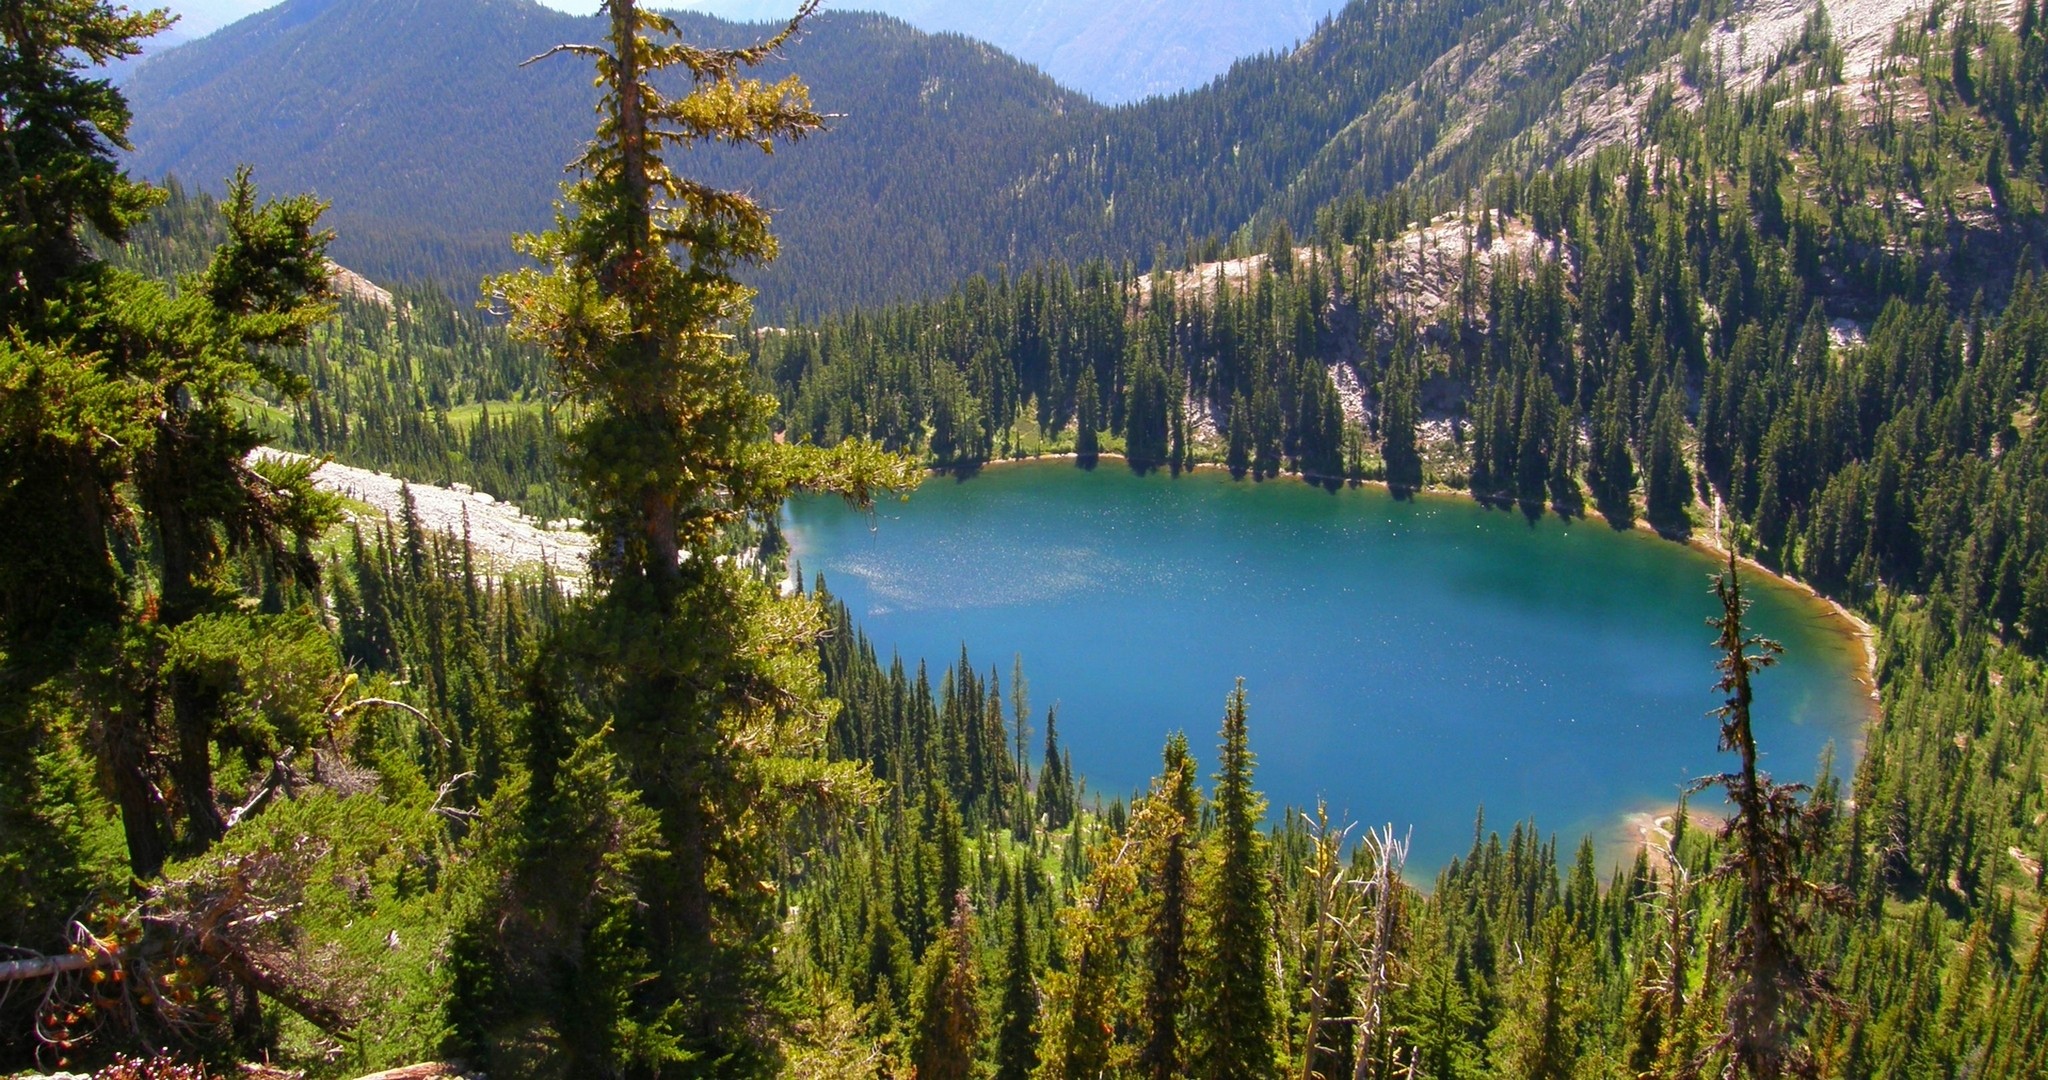 General 2048x1080 photography landscape nature lake mountains forest summer Washington State